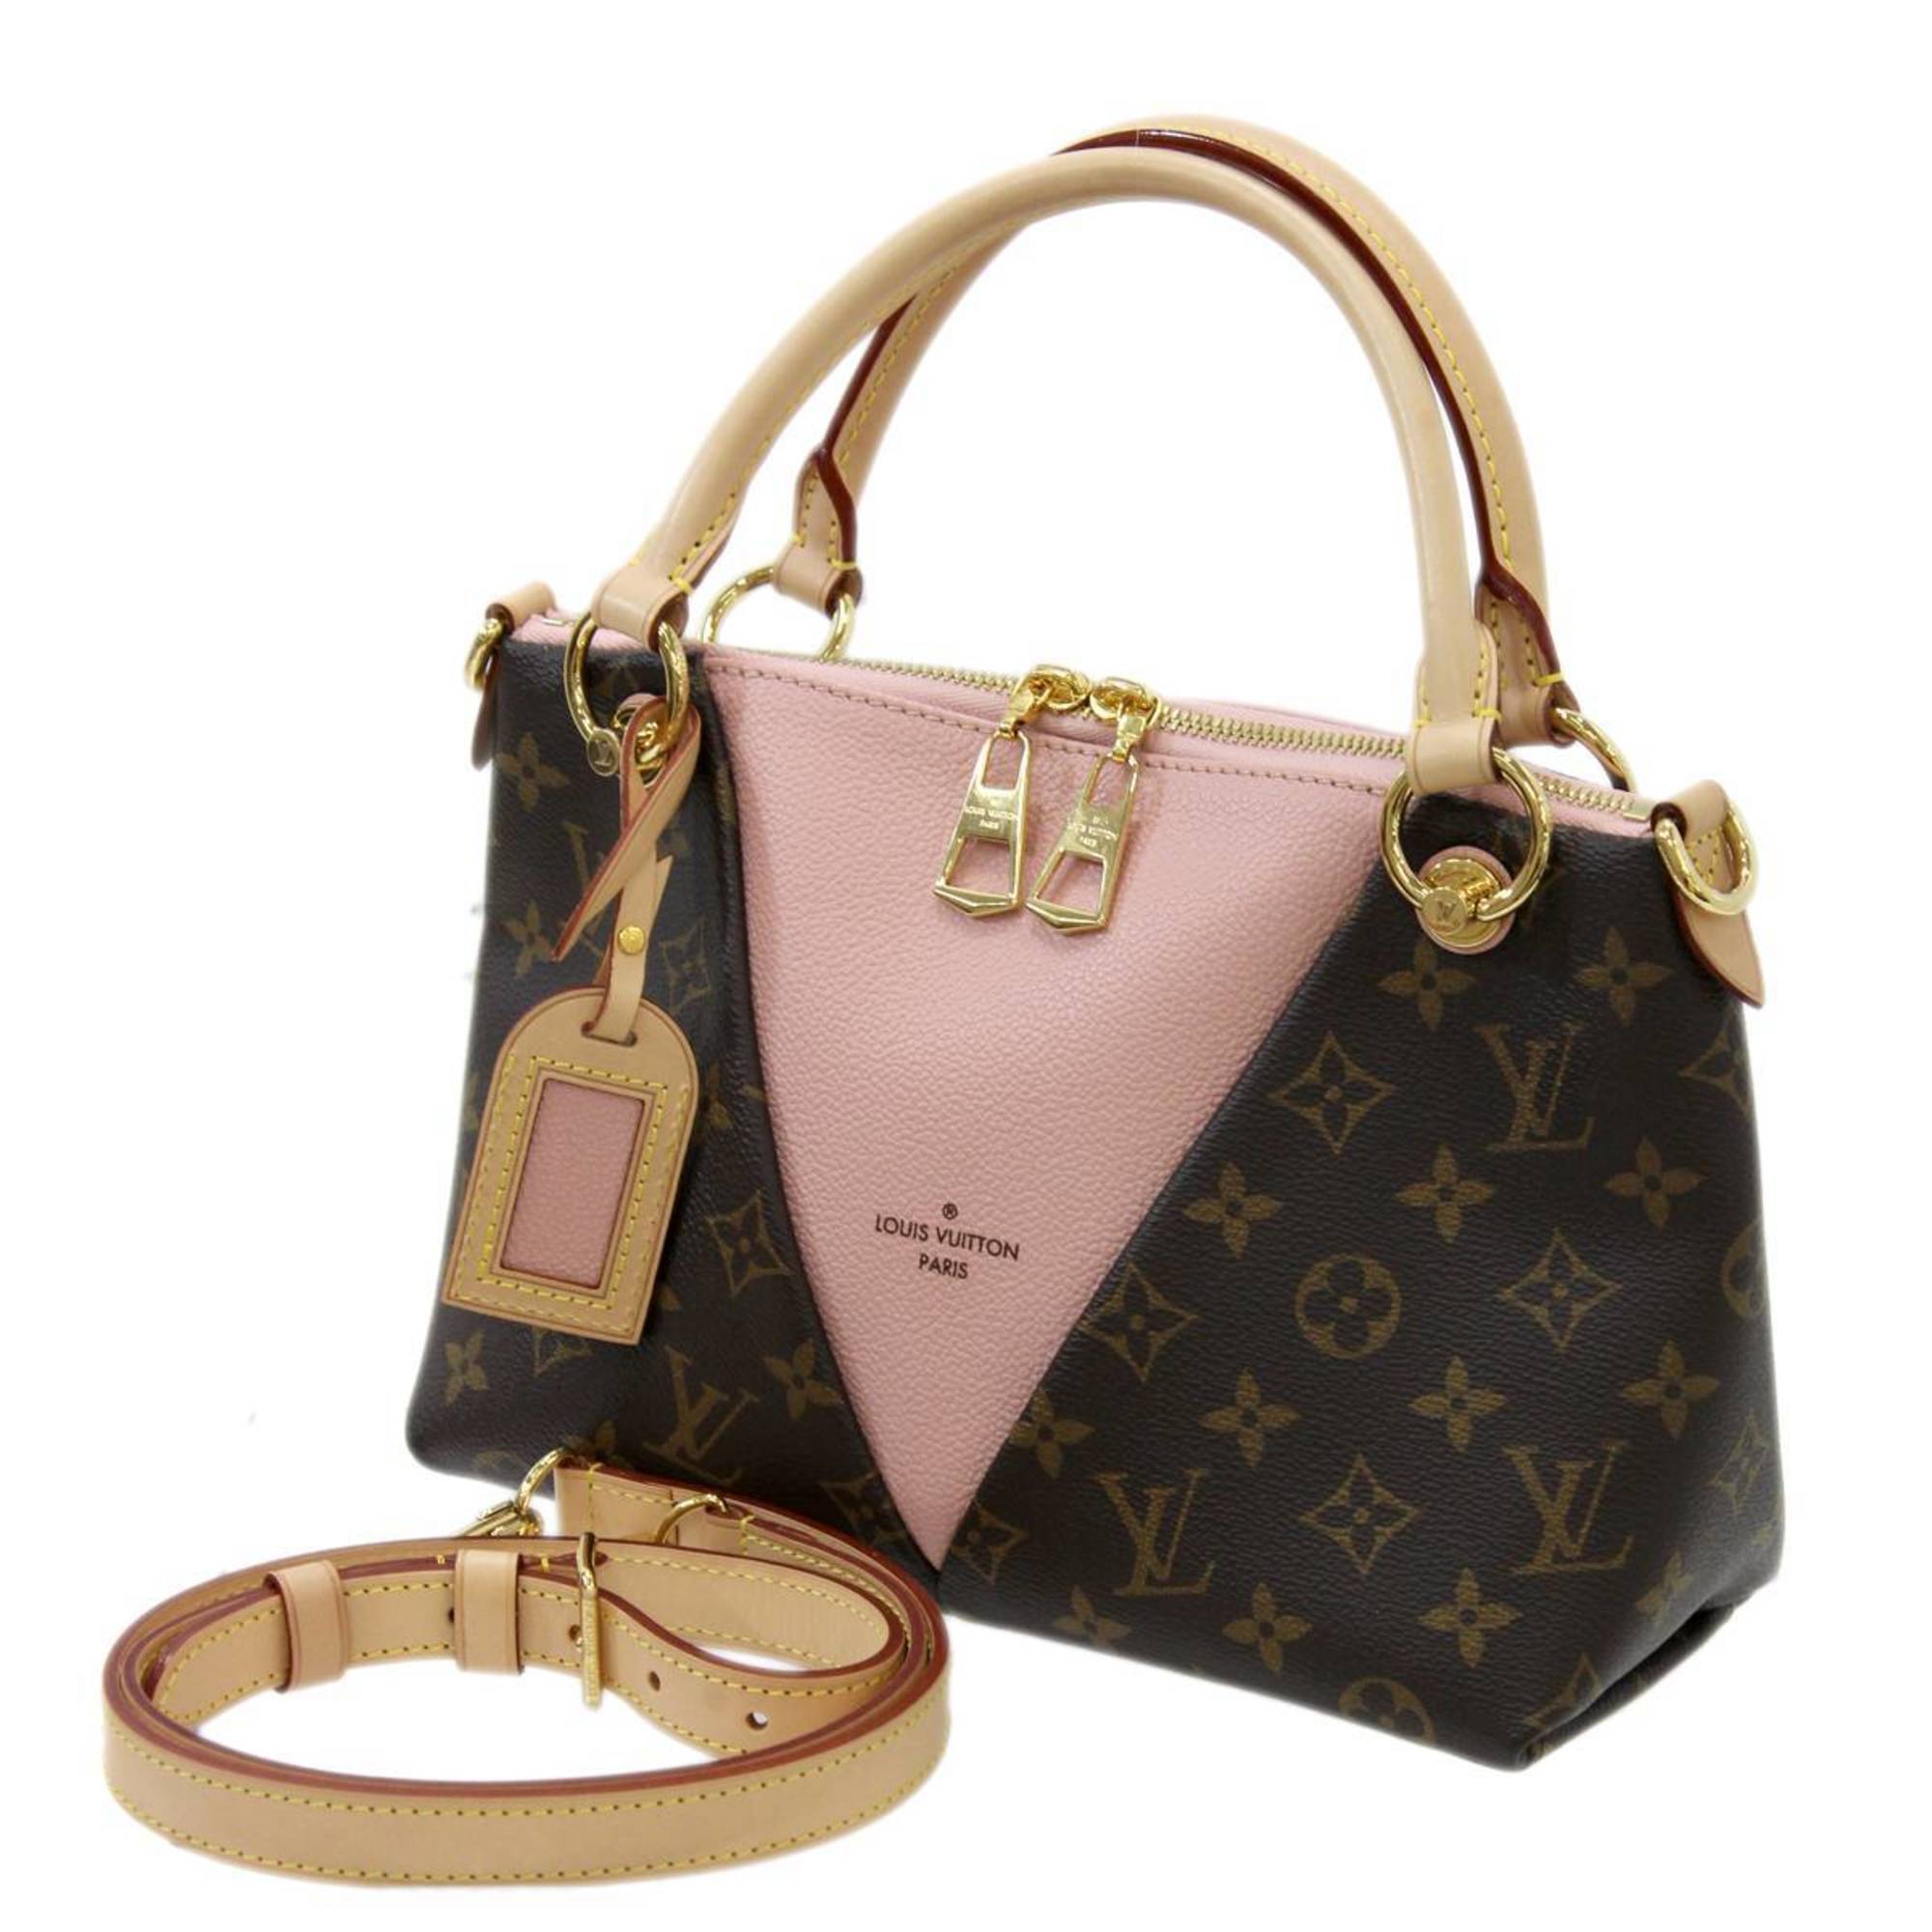 Preowned Authentic Louis Vuitton Monogram V Tote BB Rose Poudre